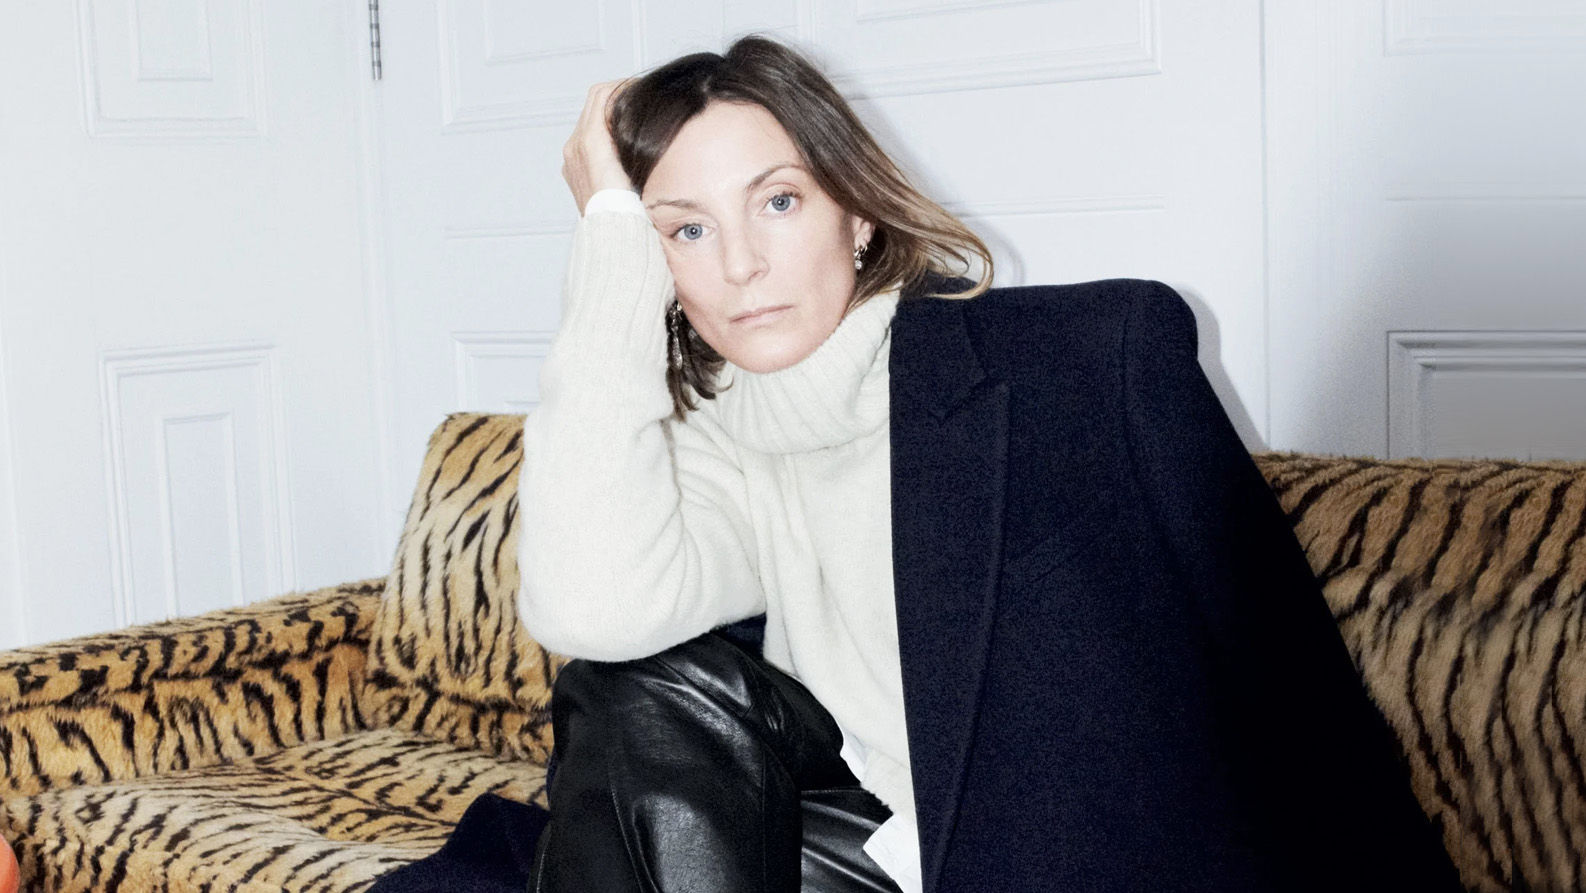 Must Read: Phoebe Philo May Be Planning Her Comeback